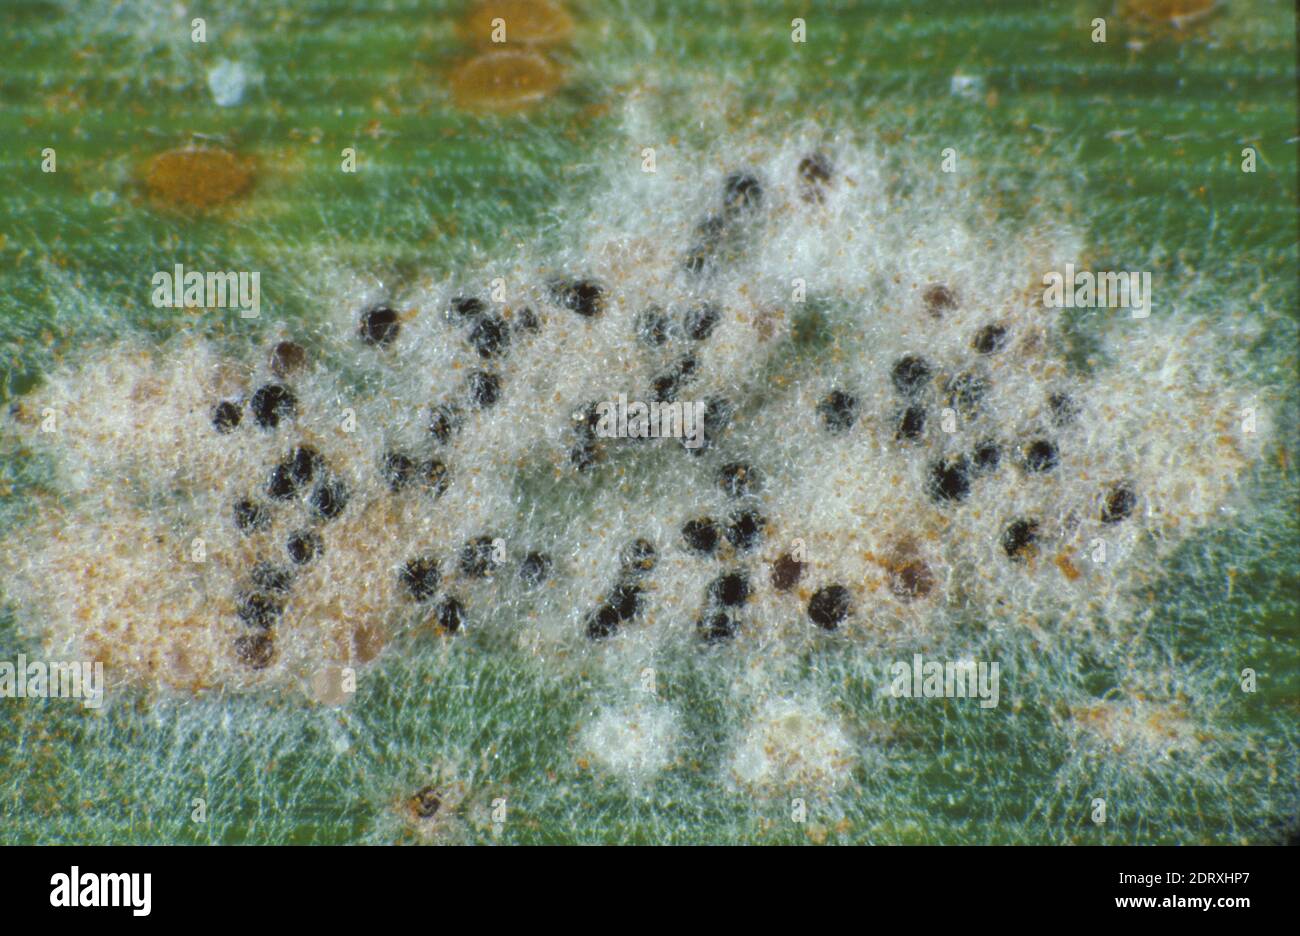 Powdery mildew (Erysiphe graminis f.sp. tritici) mycelium and cleistothecia and brown leaf rust (Puccinia triticina) pustules on a wheat leaf Stock Photo